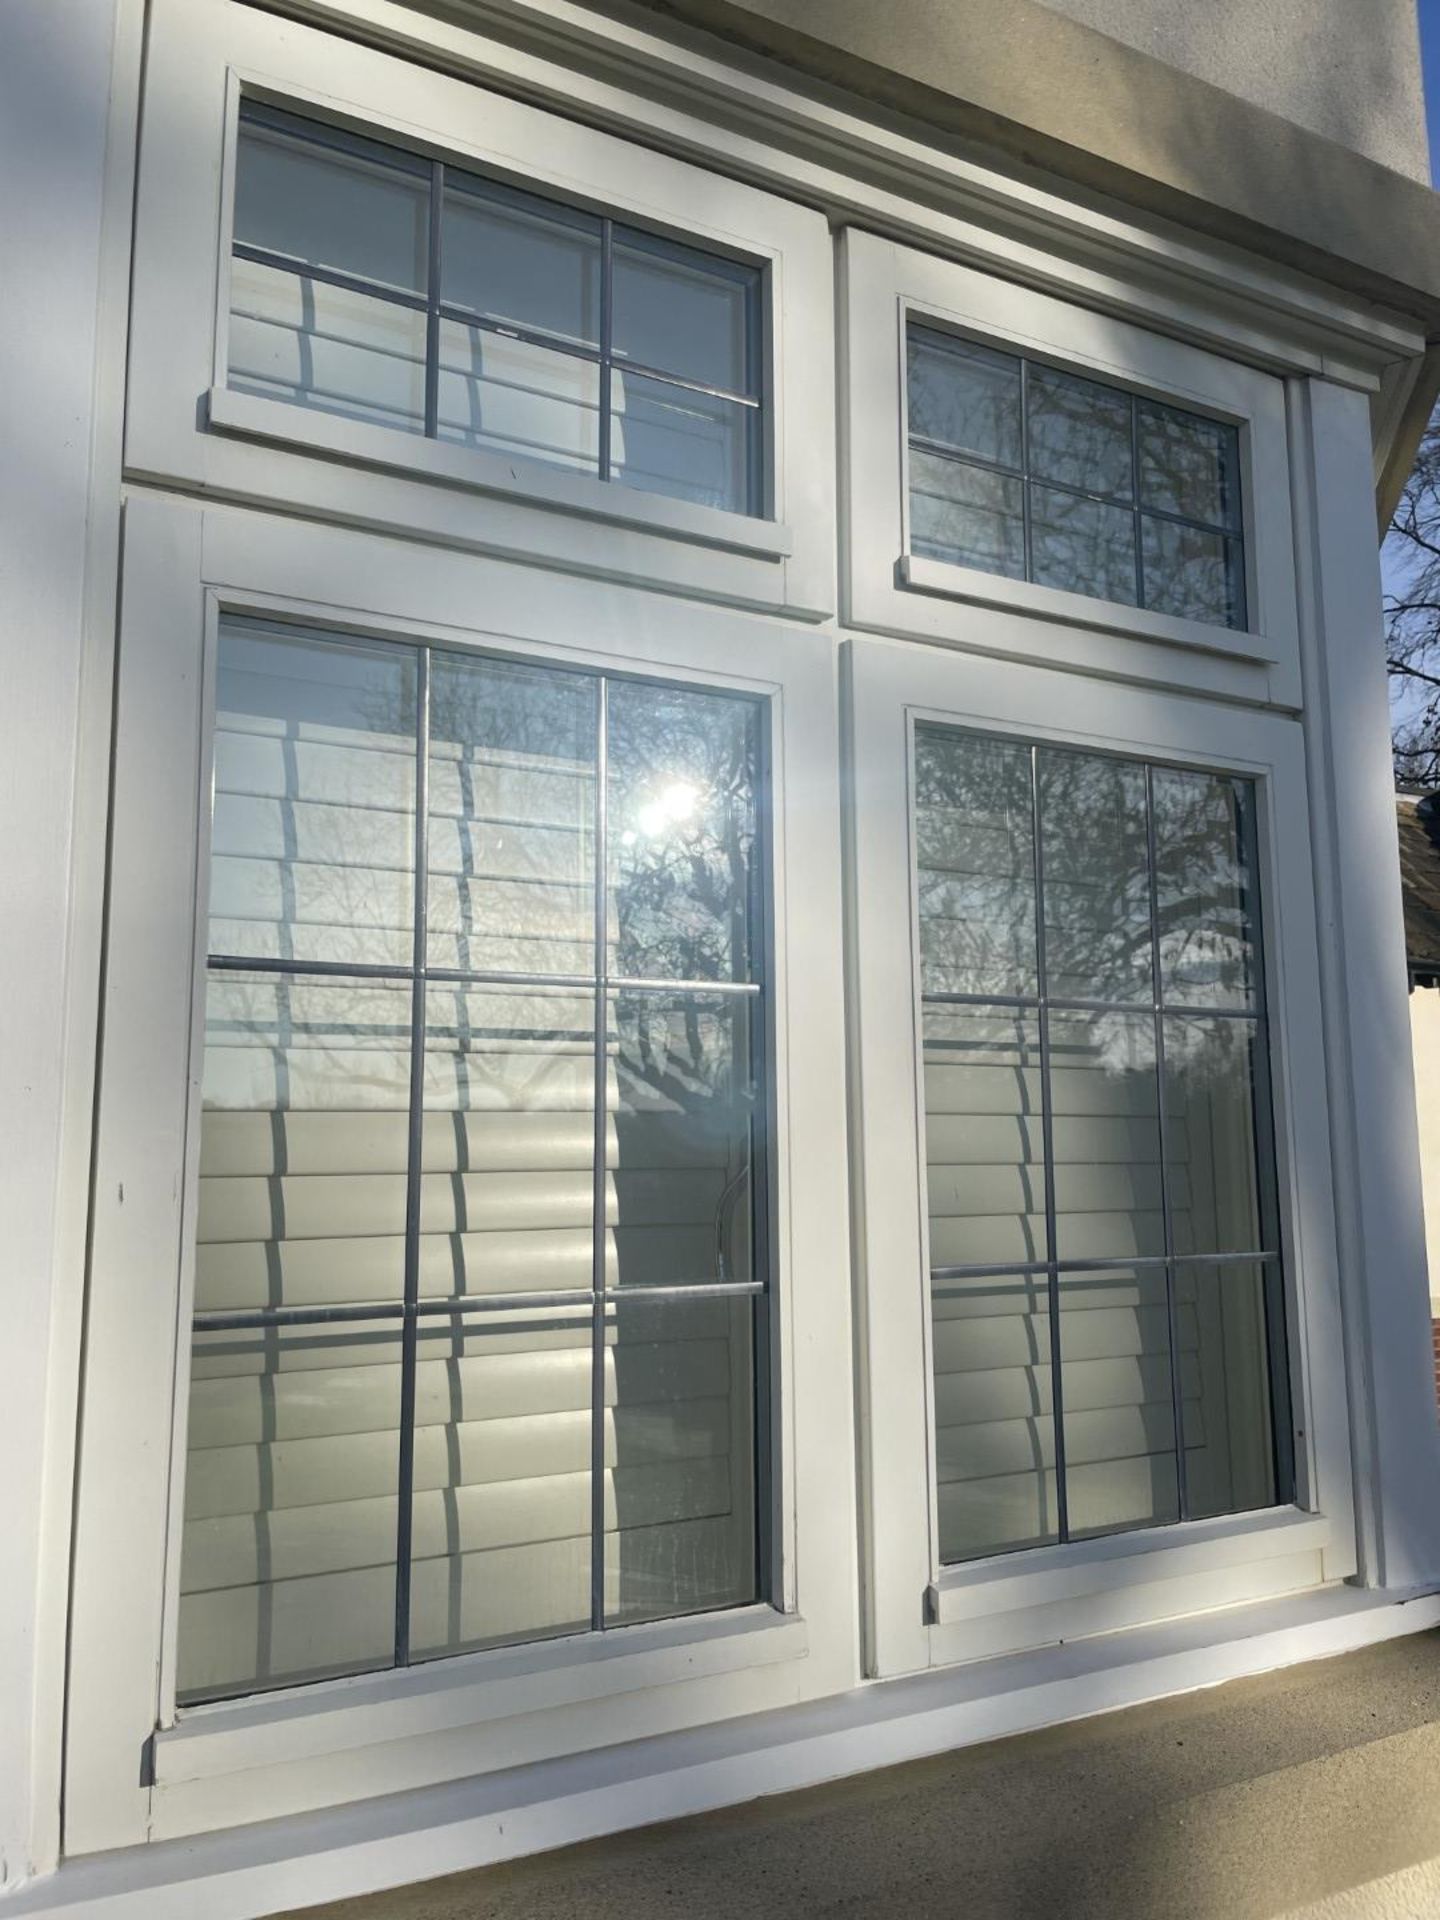 1 x Hardwood Timber Double Glazed Window Frames fitted with Shutter Blinds, In White - Ref: PAN101 - Image 23 of 23